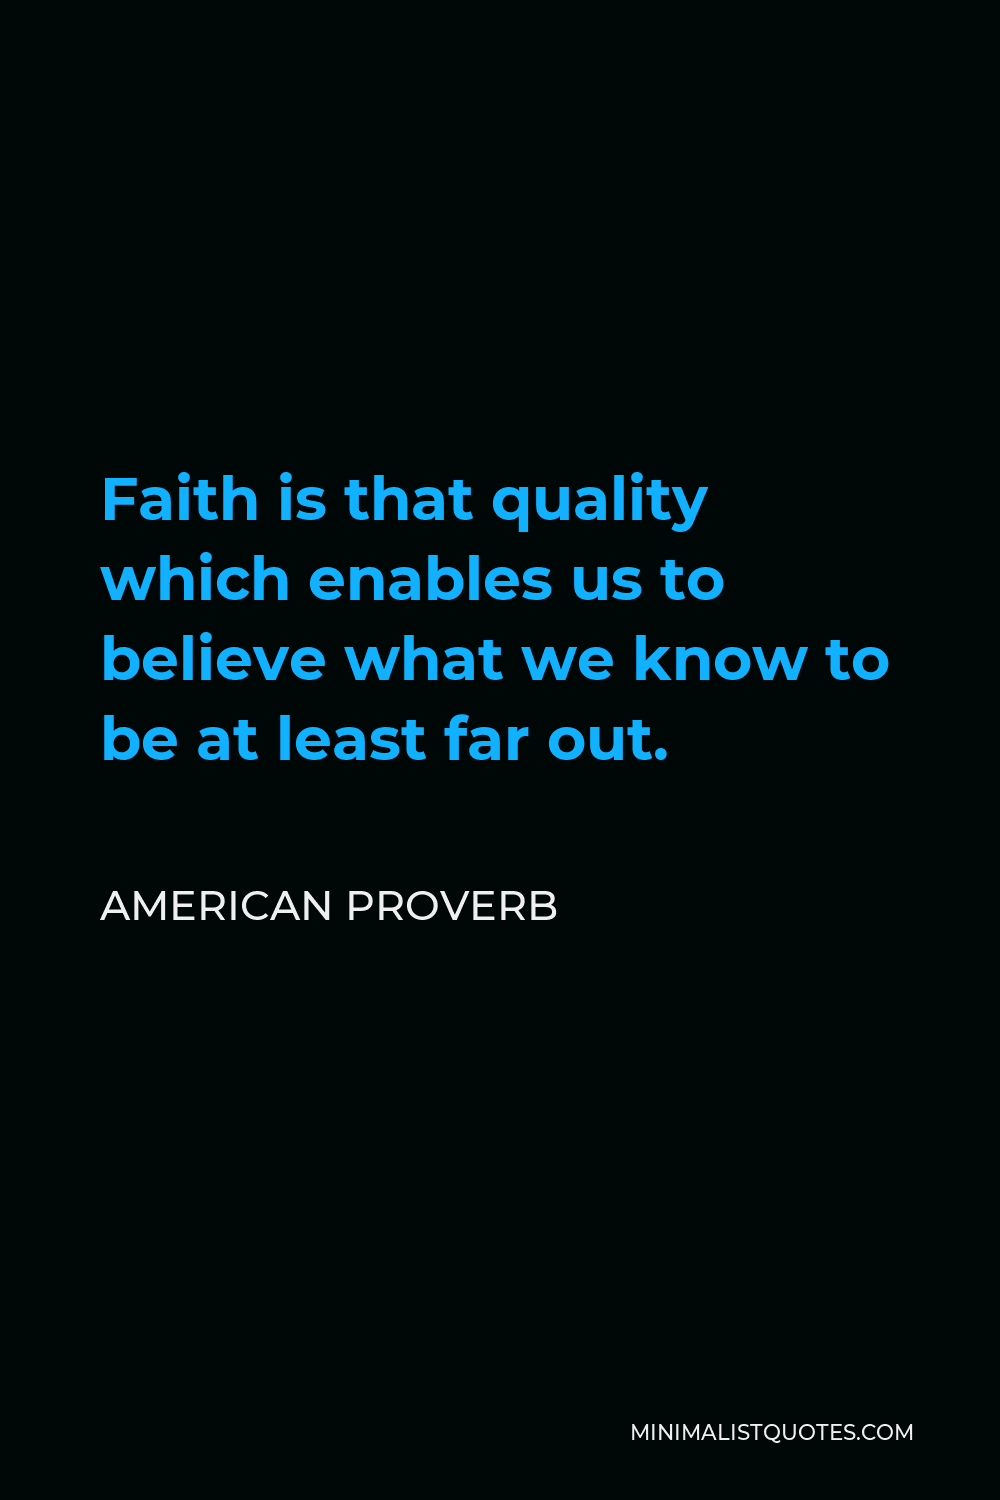 American Proverb Quote - Faith is that quality which enables us to believe what we know to be at least far out.